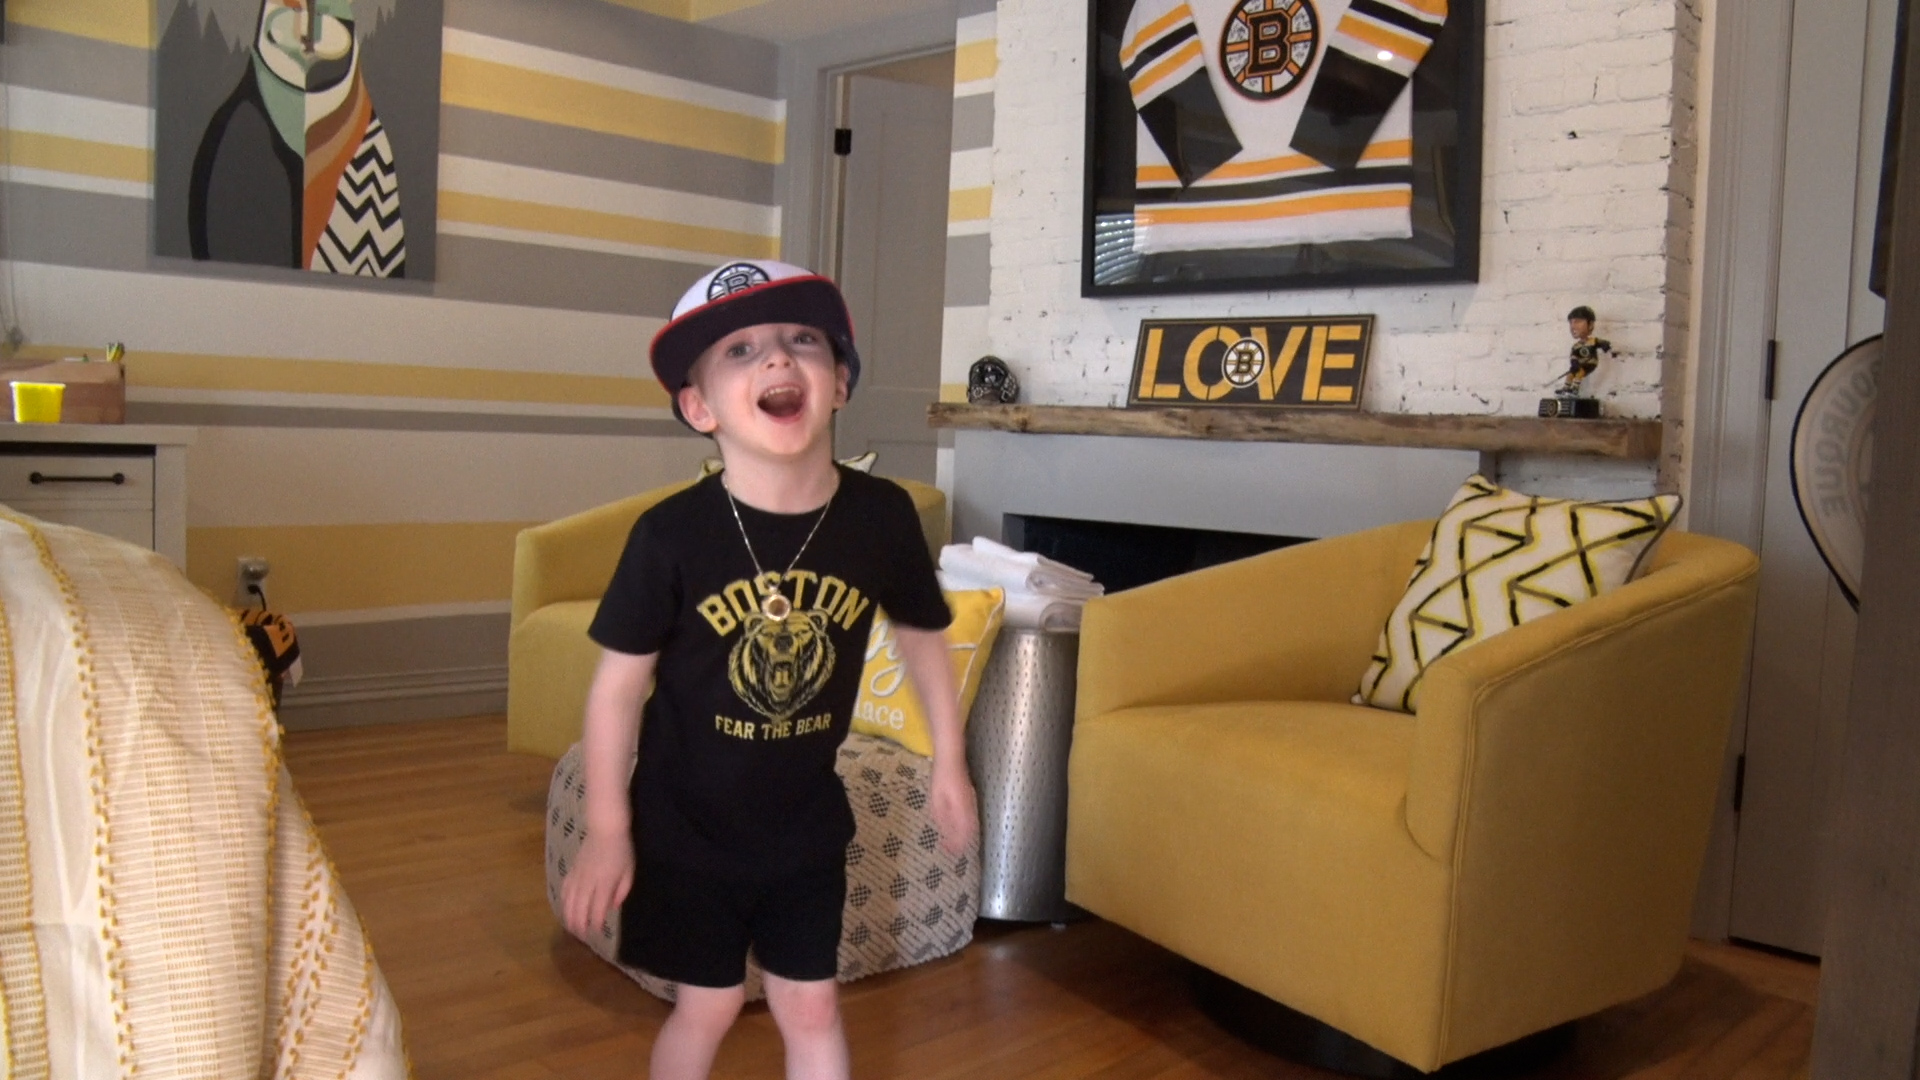 Mighty Quinn displays his excitement as he tours Tommy's Place | Bob's Discount Furniture